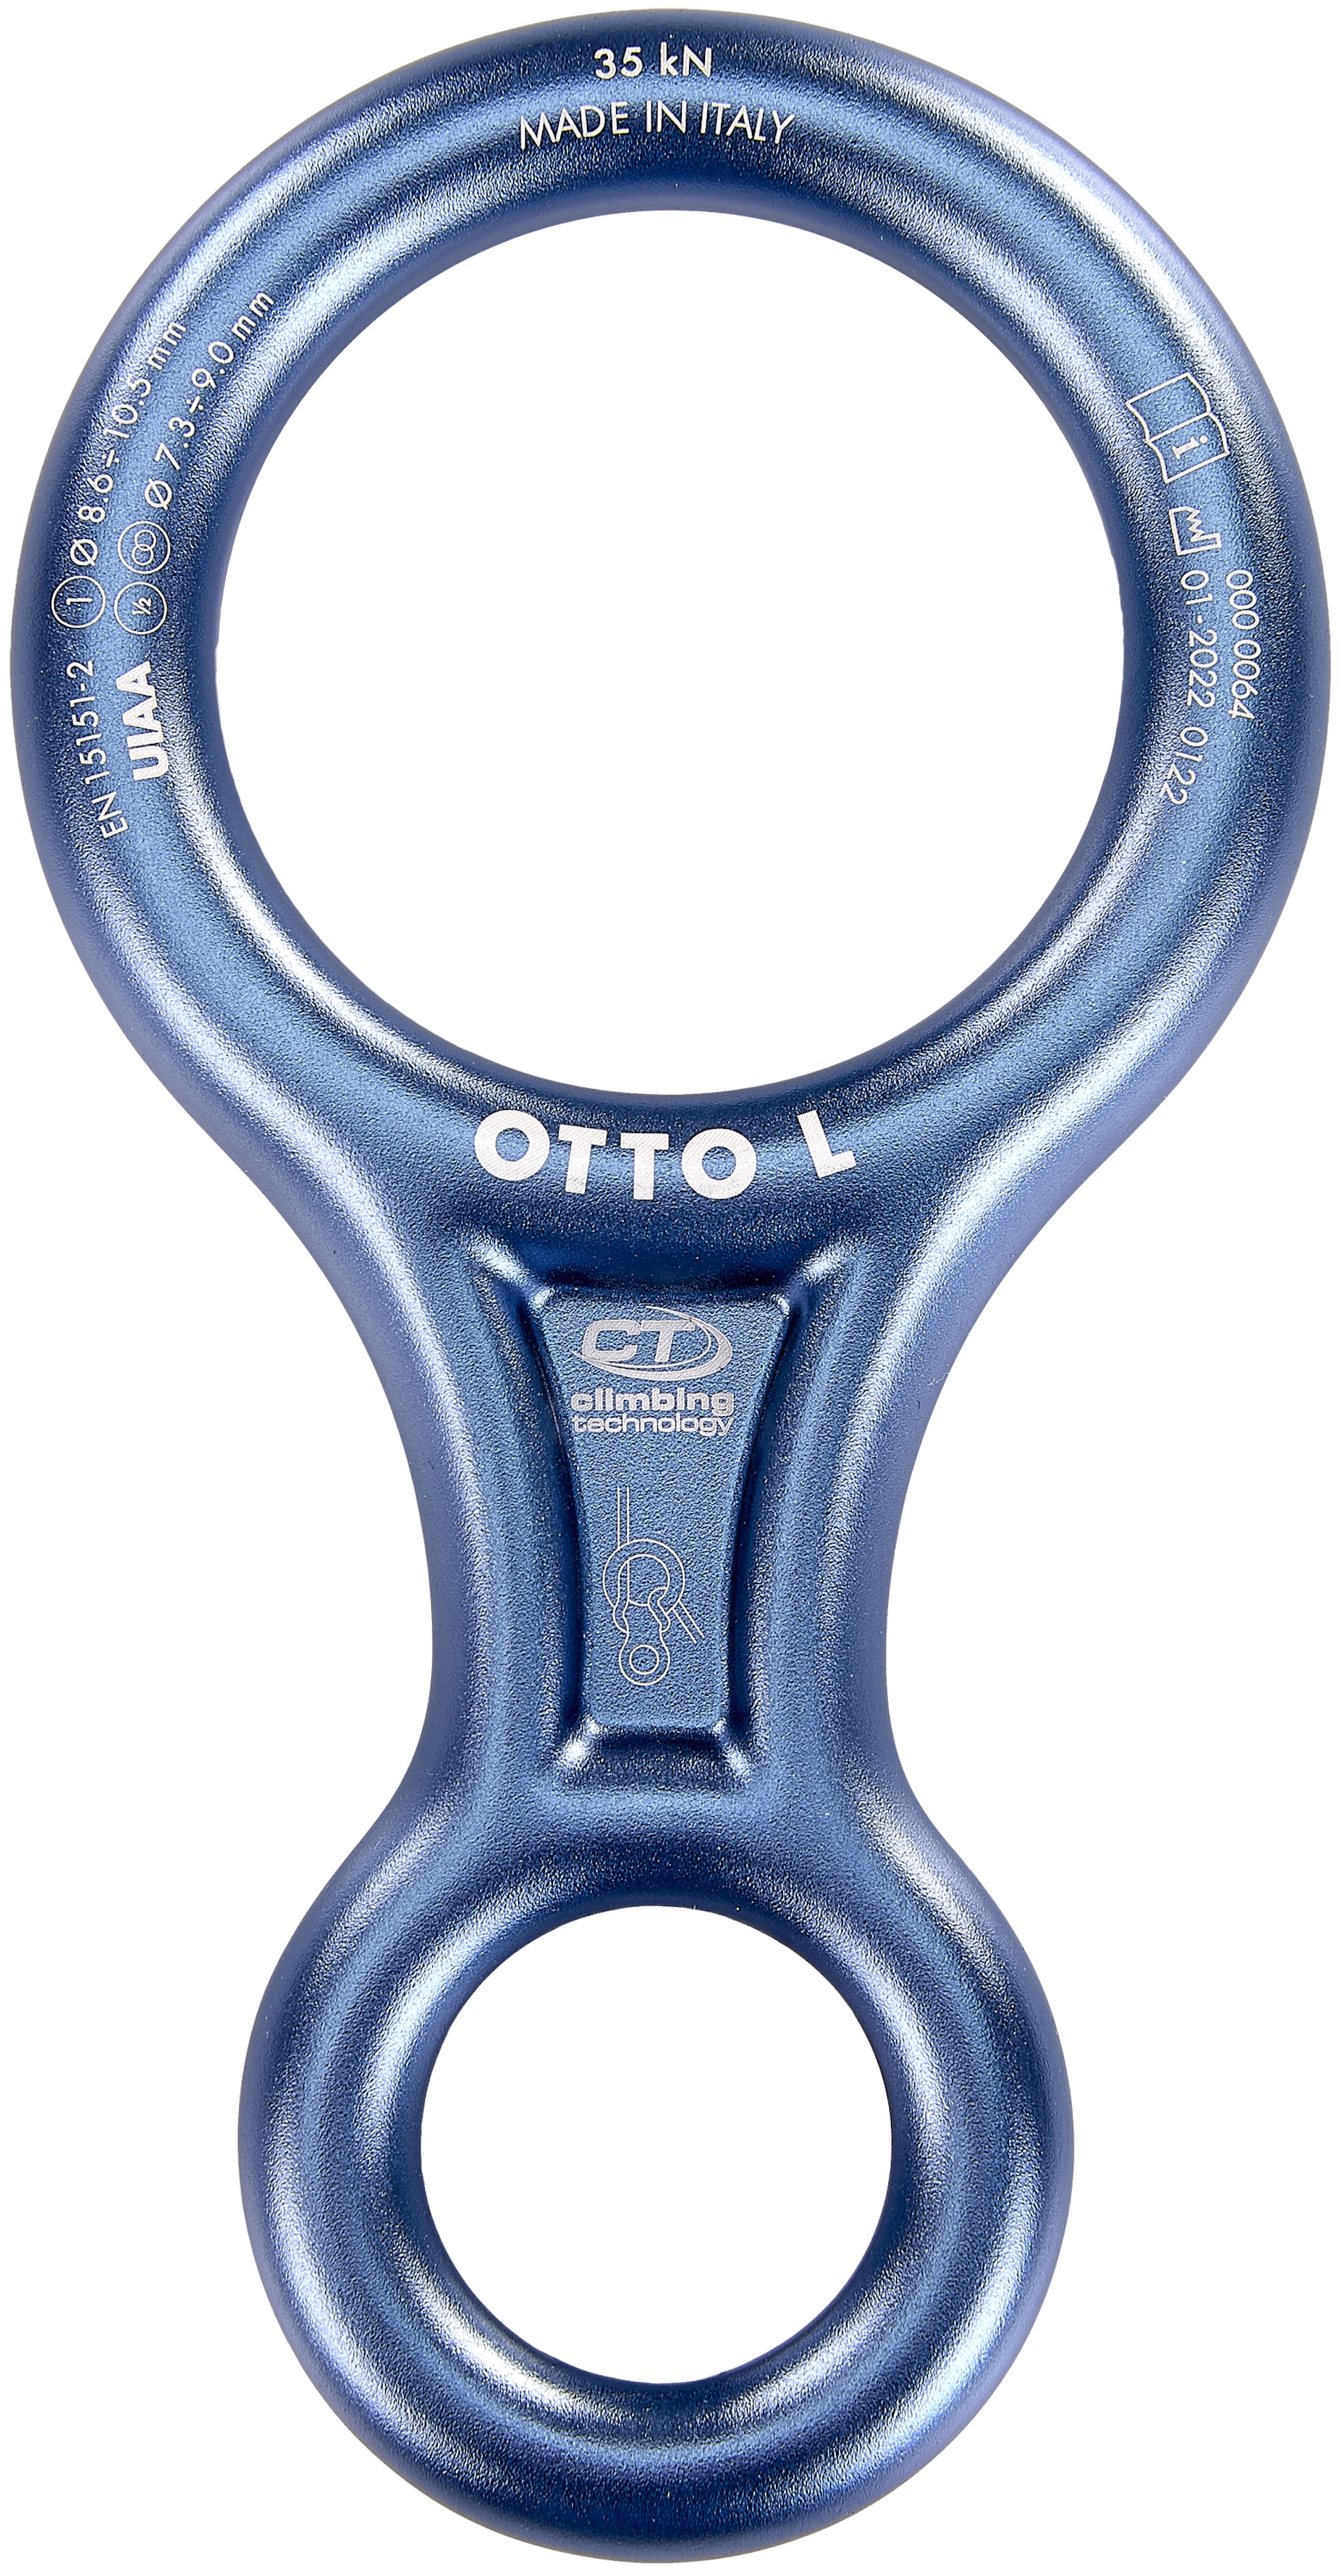 Otto L figure-eight by Climbing Technology